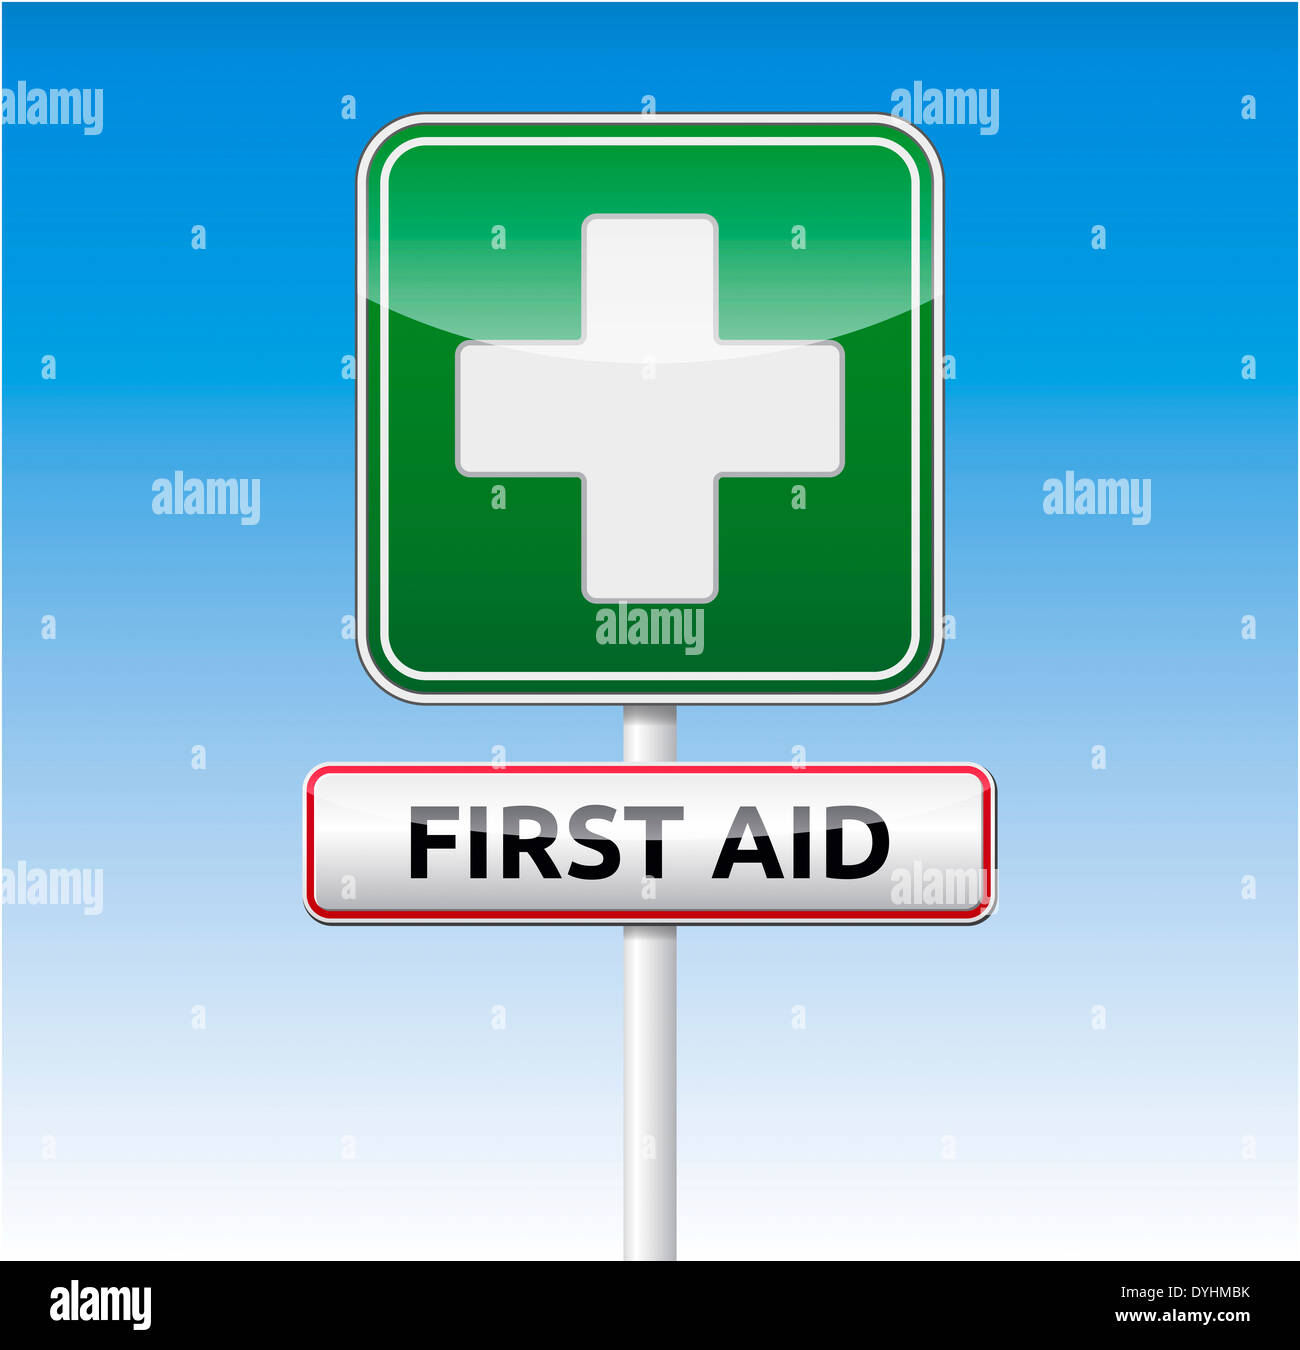 First aid traffic sign with text on blue sky background. Stock Photo